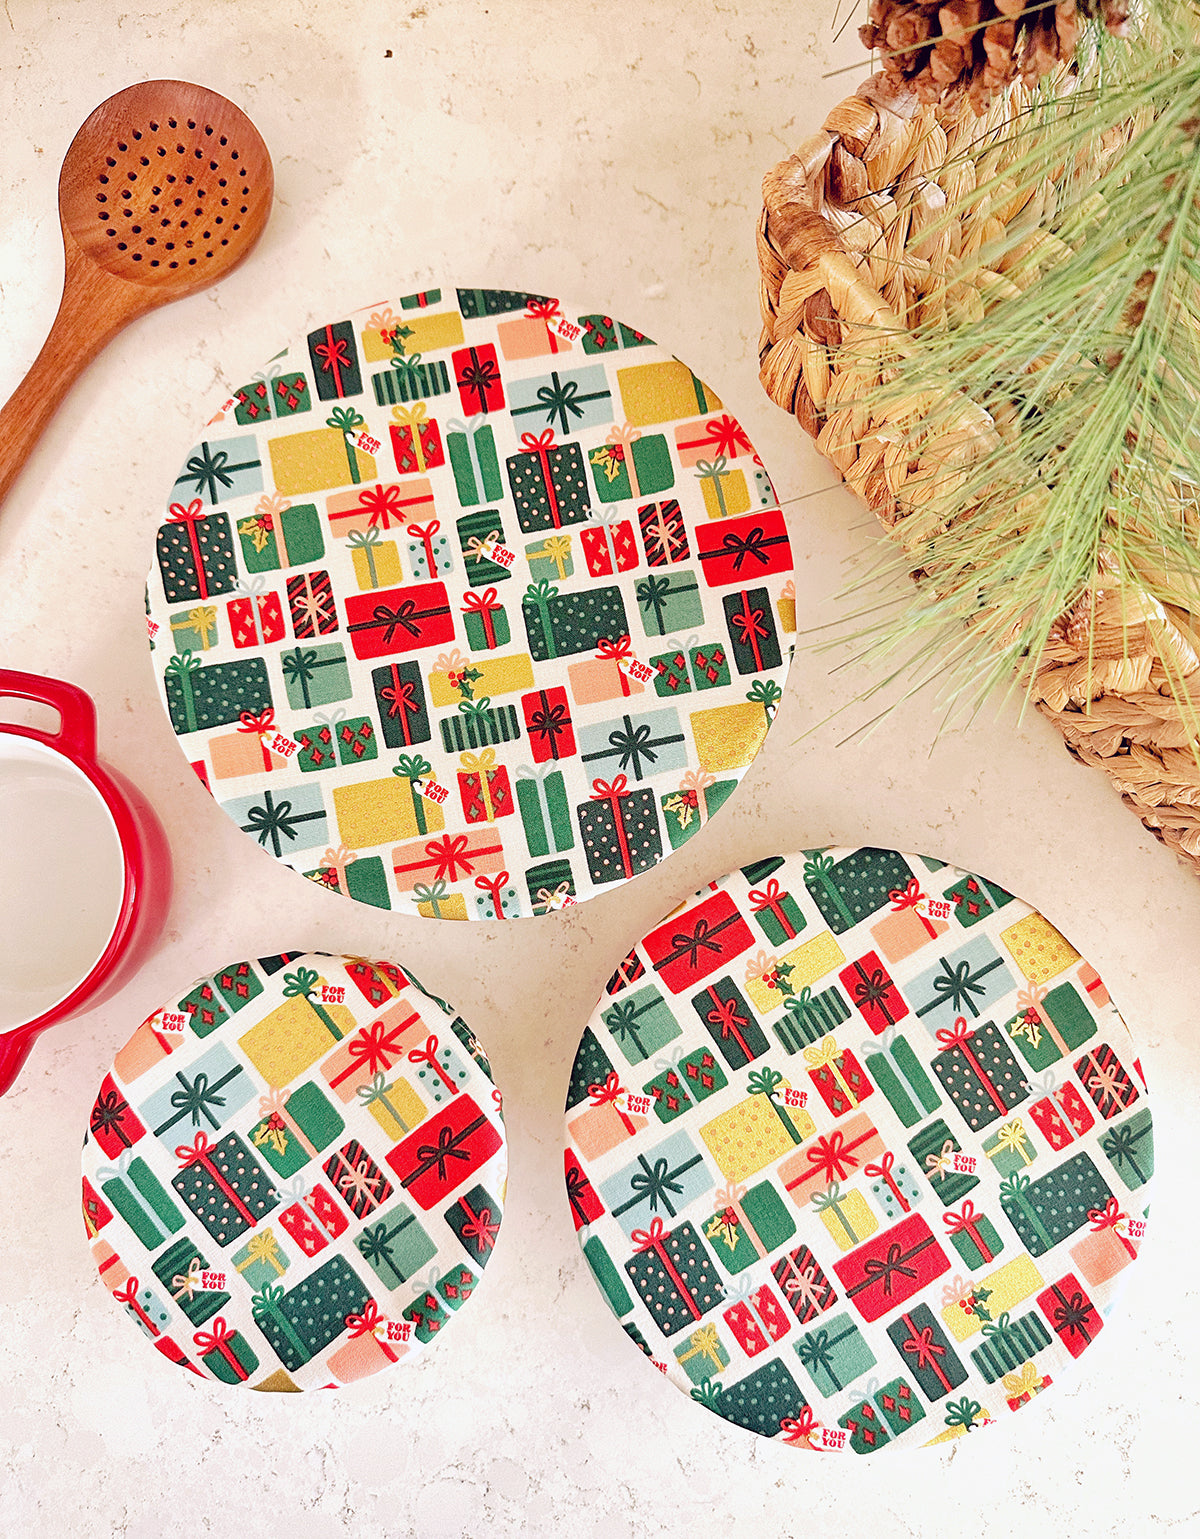 Holiday Presents Cotton Fabric Food Baking Bread Mixer Bowl Covers | Reusable Washable Zero Waste Eco-friendly Sustainable Gift Kitchen Tool